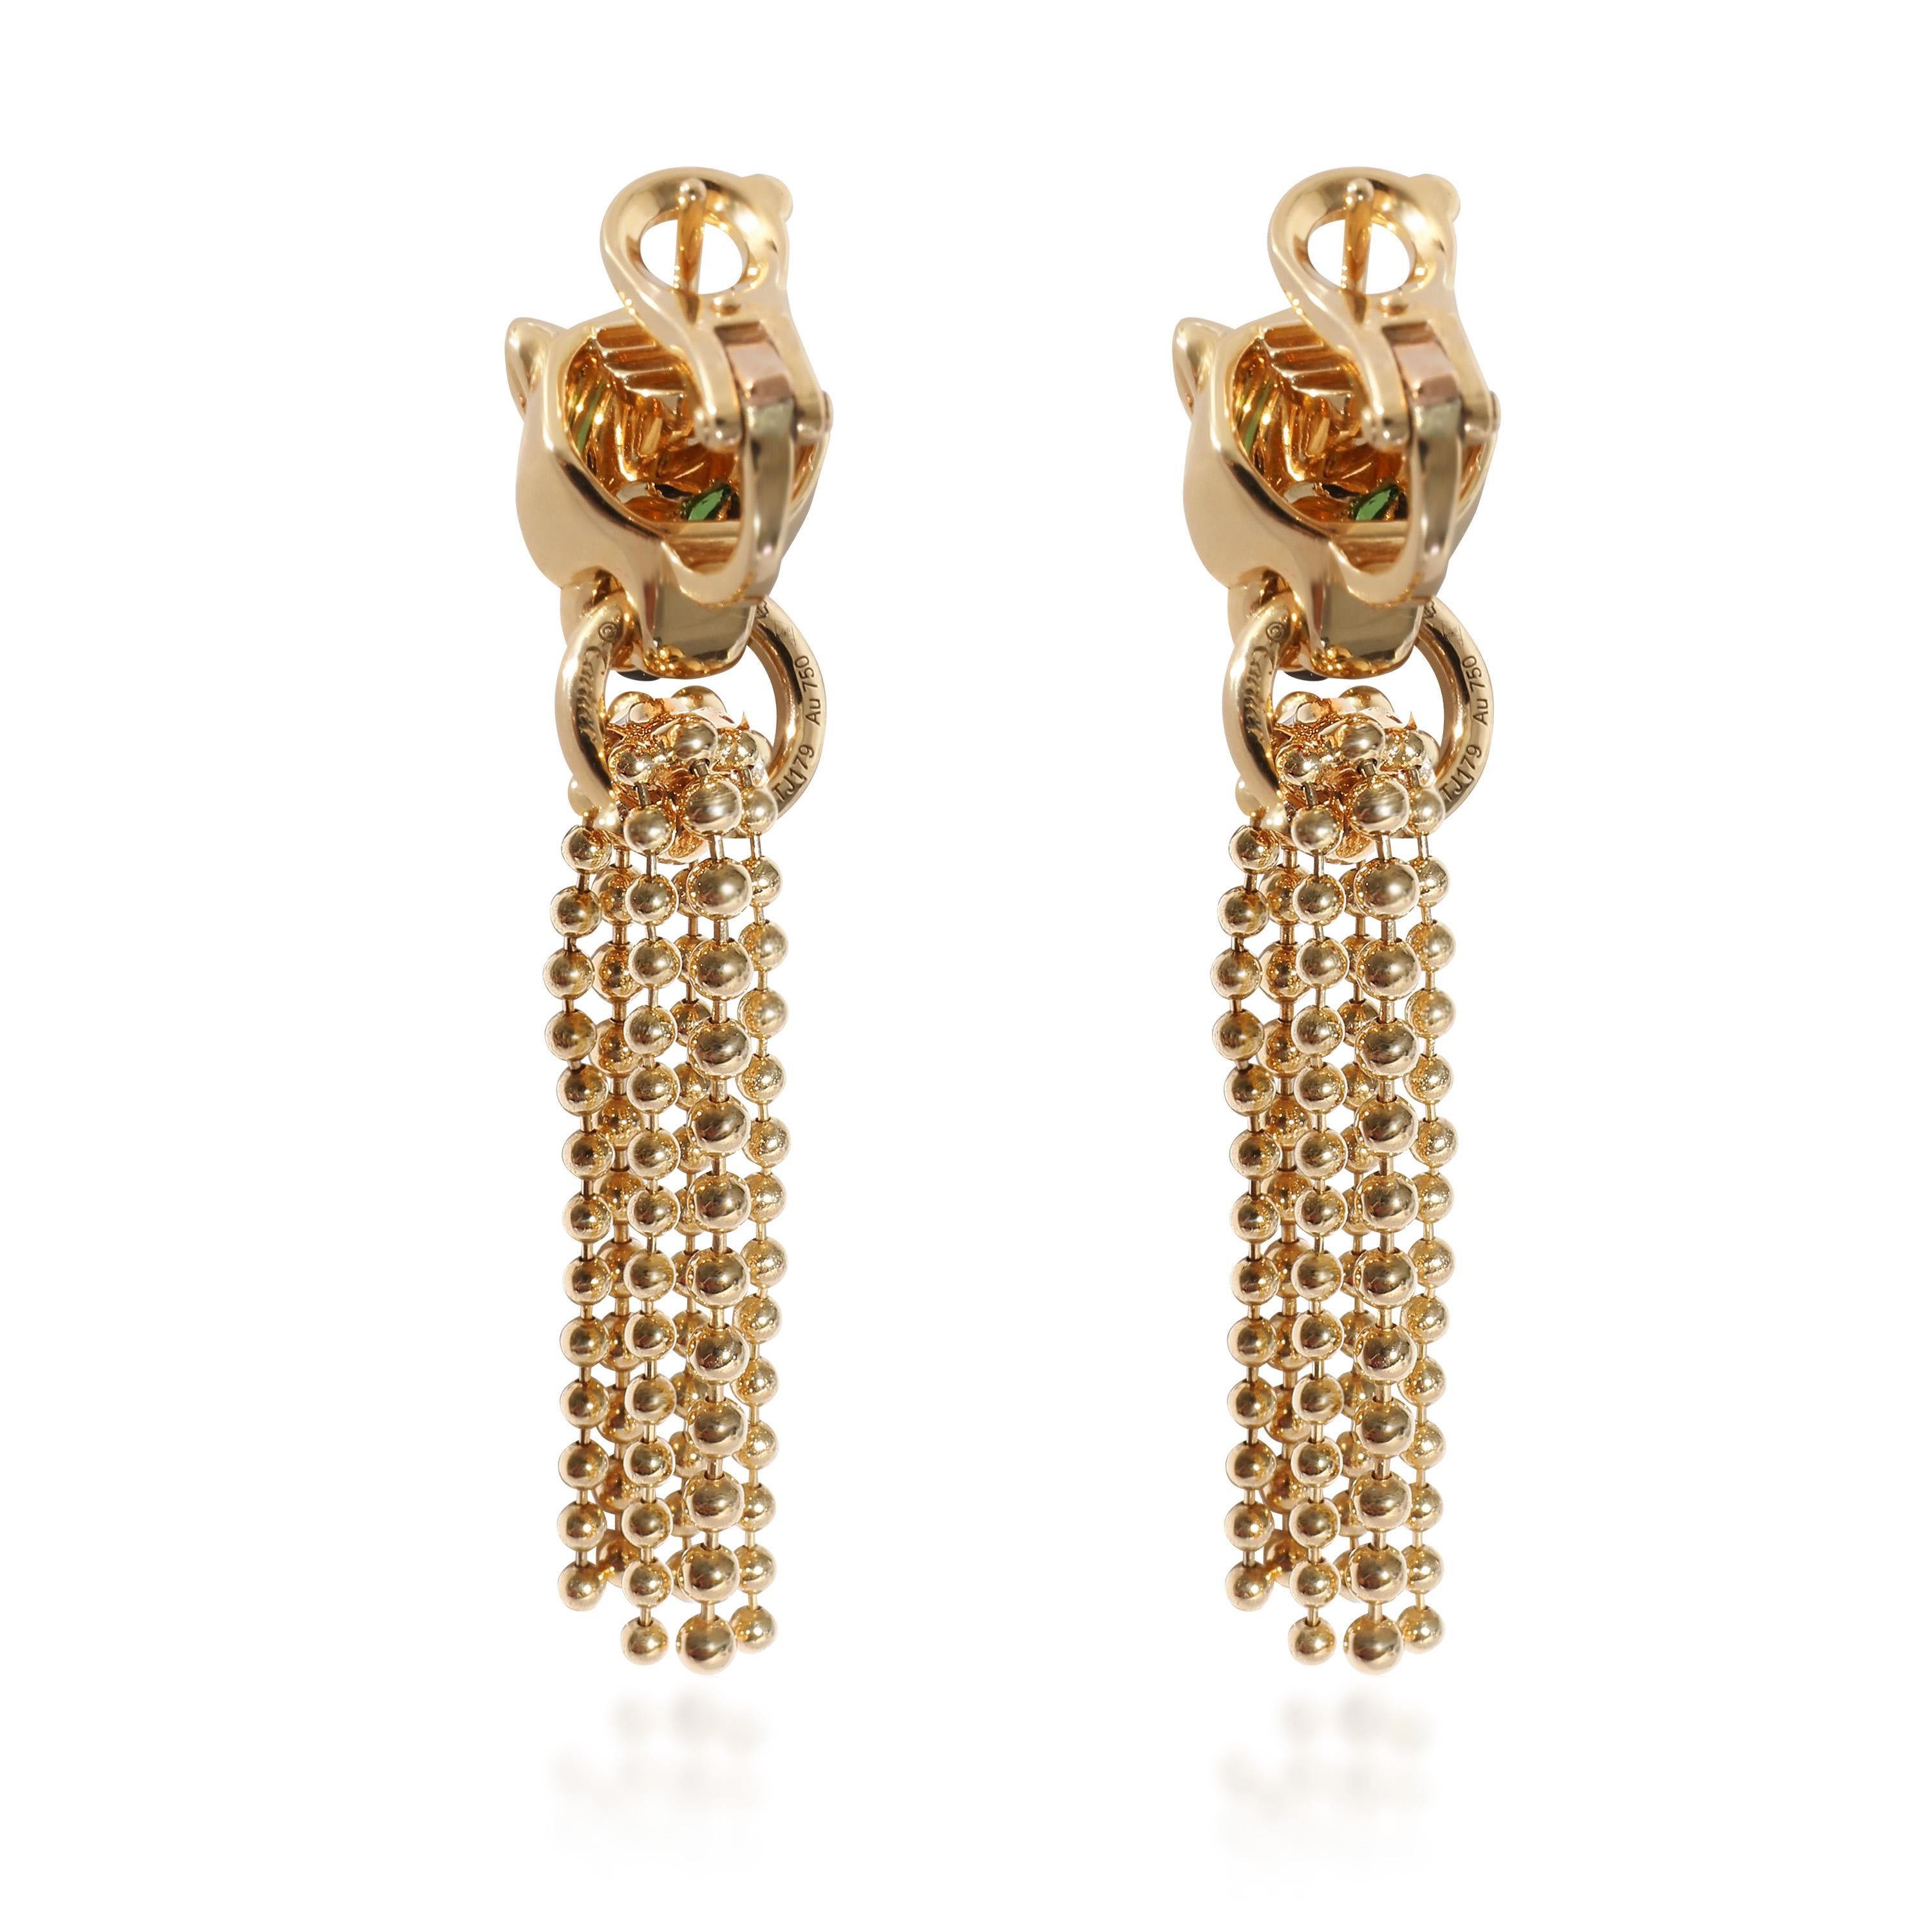 
Cartier Panthère de Cartier Diamond Earrings in 18K Yellow Gold 0.1 CTW

PRIMARY DETAILS
SKU: 136303
Listing Title: Cartier Panthère de Cartier Diamond Earrings in 18K Yellow Gold 0.1 CTW
Condition Description: Retails for 24800 USD. In excellent